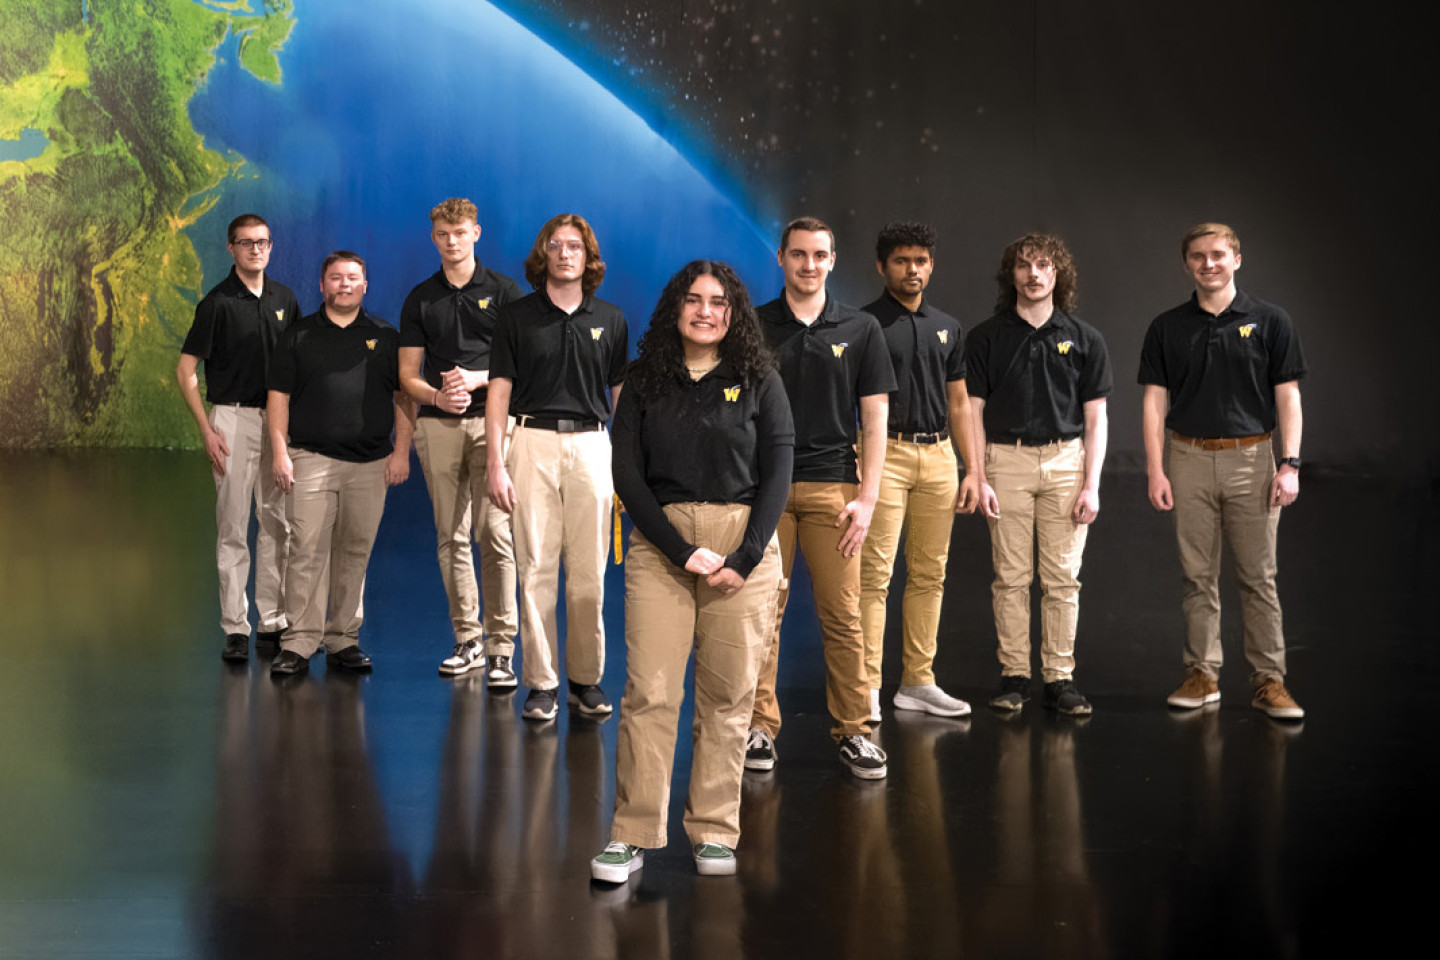 A group photo of WALI students in front of a mural of the Earth.